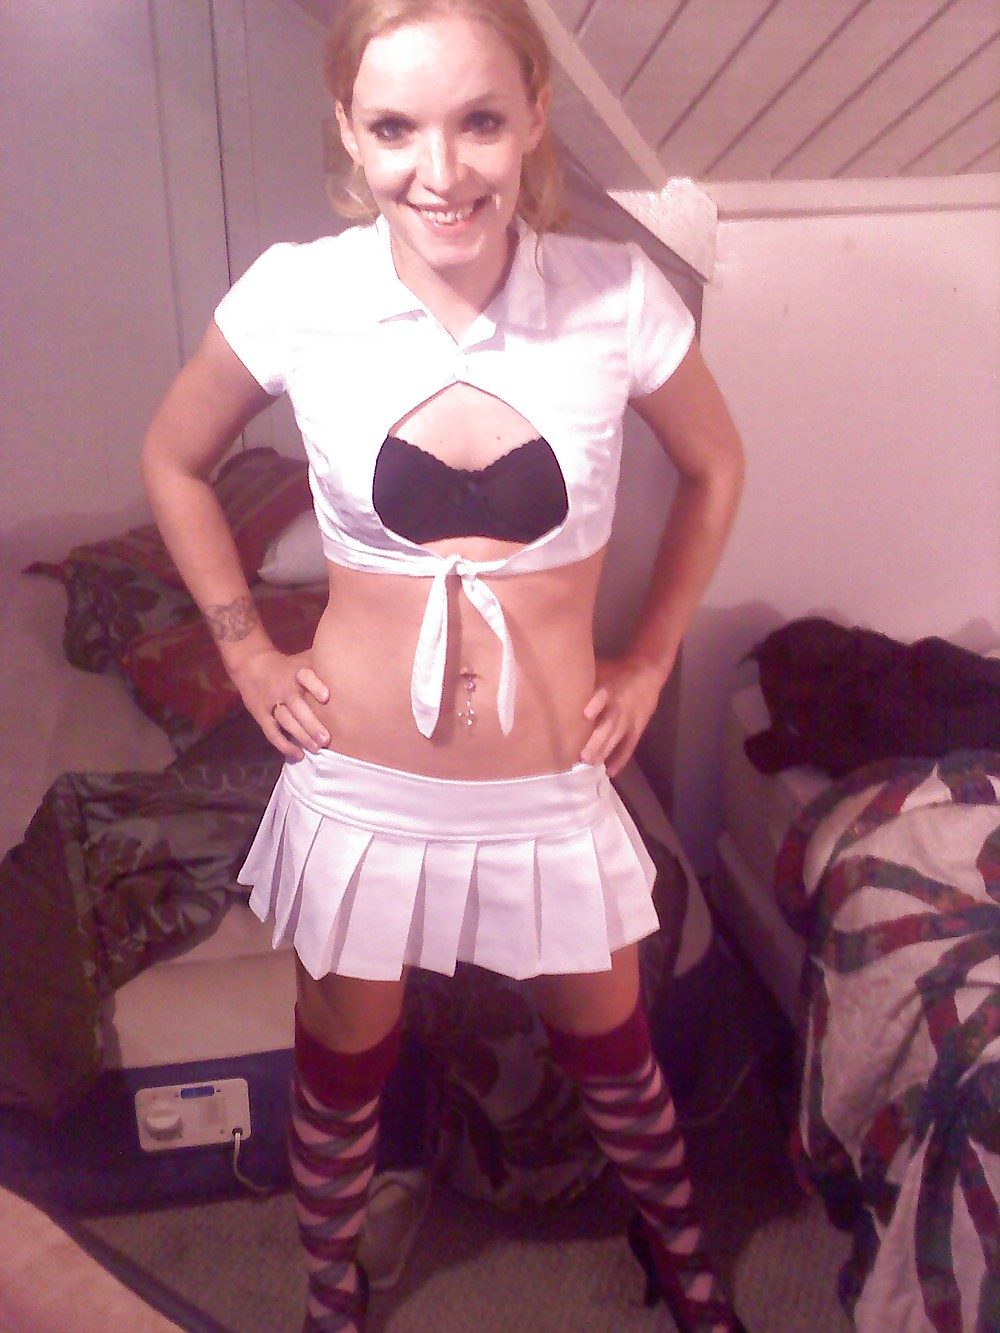 sexy amateur amy, white skirt and stockings adult photos